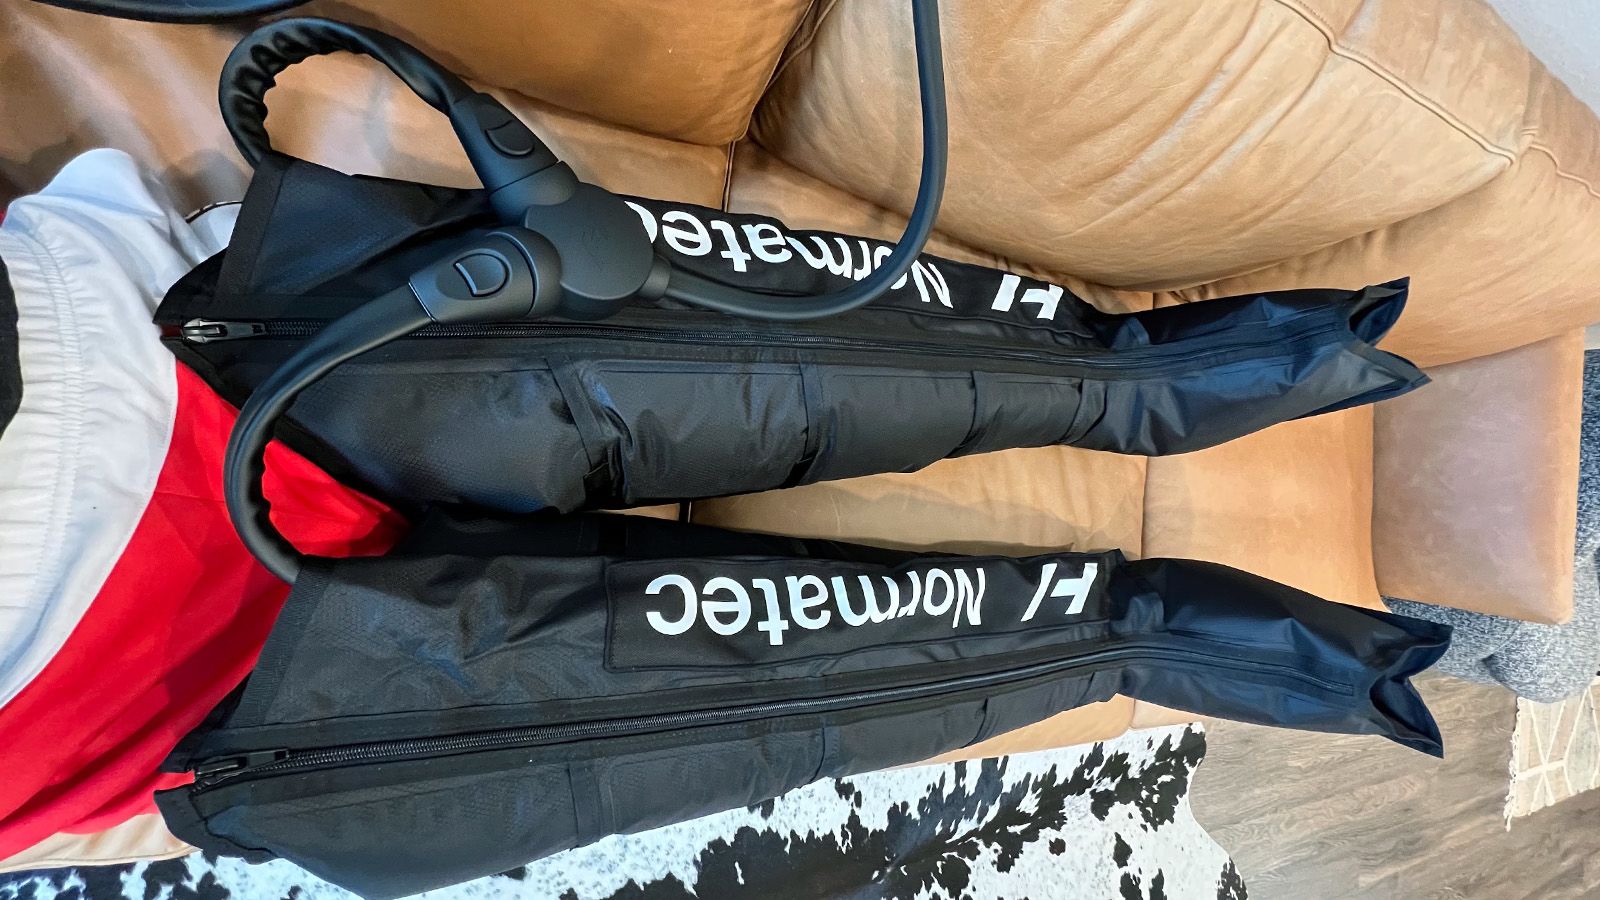 Normatec 3 Compression Boot Review